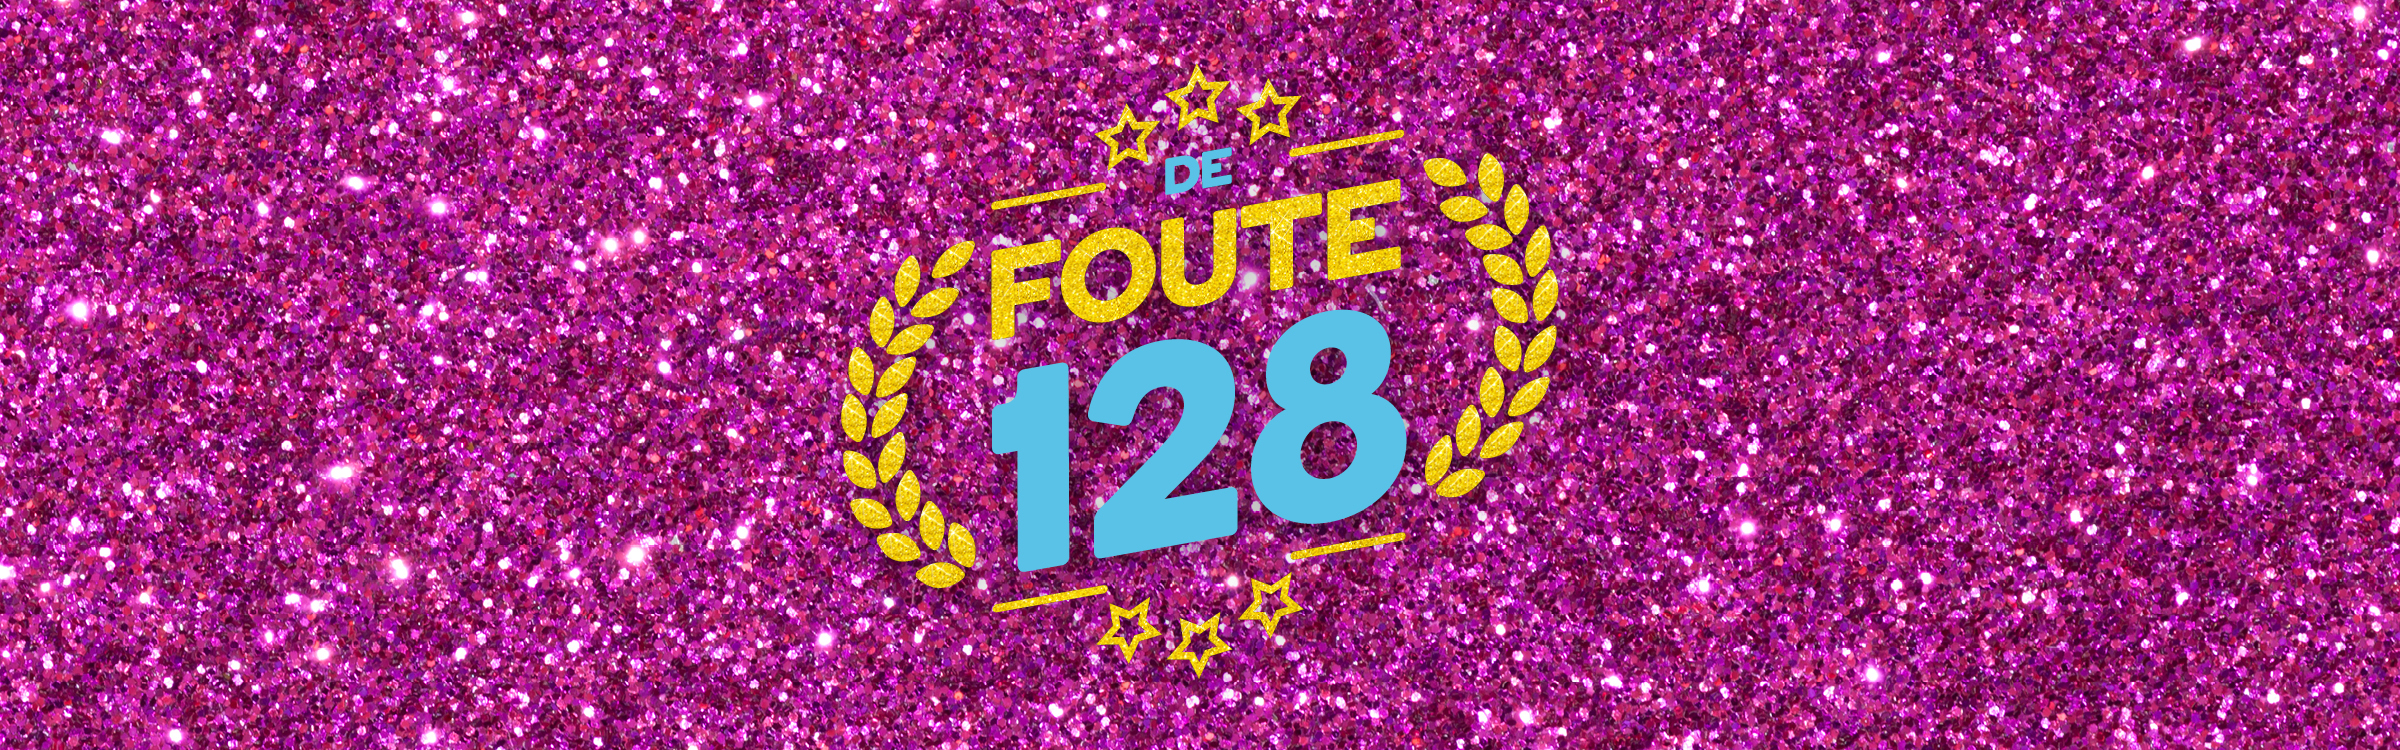 Foute 1282